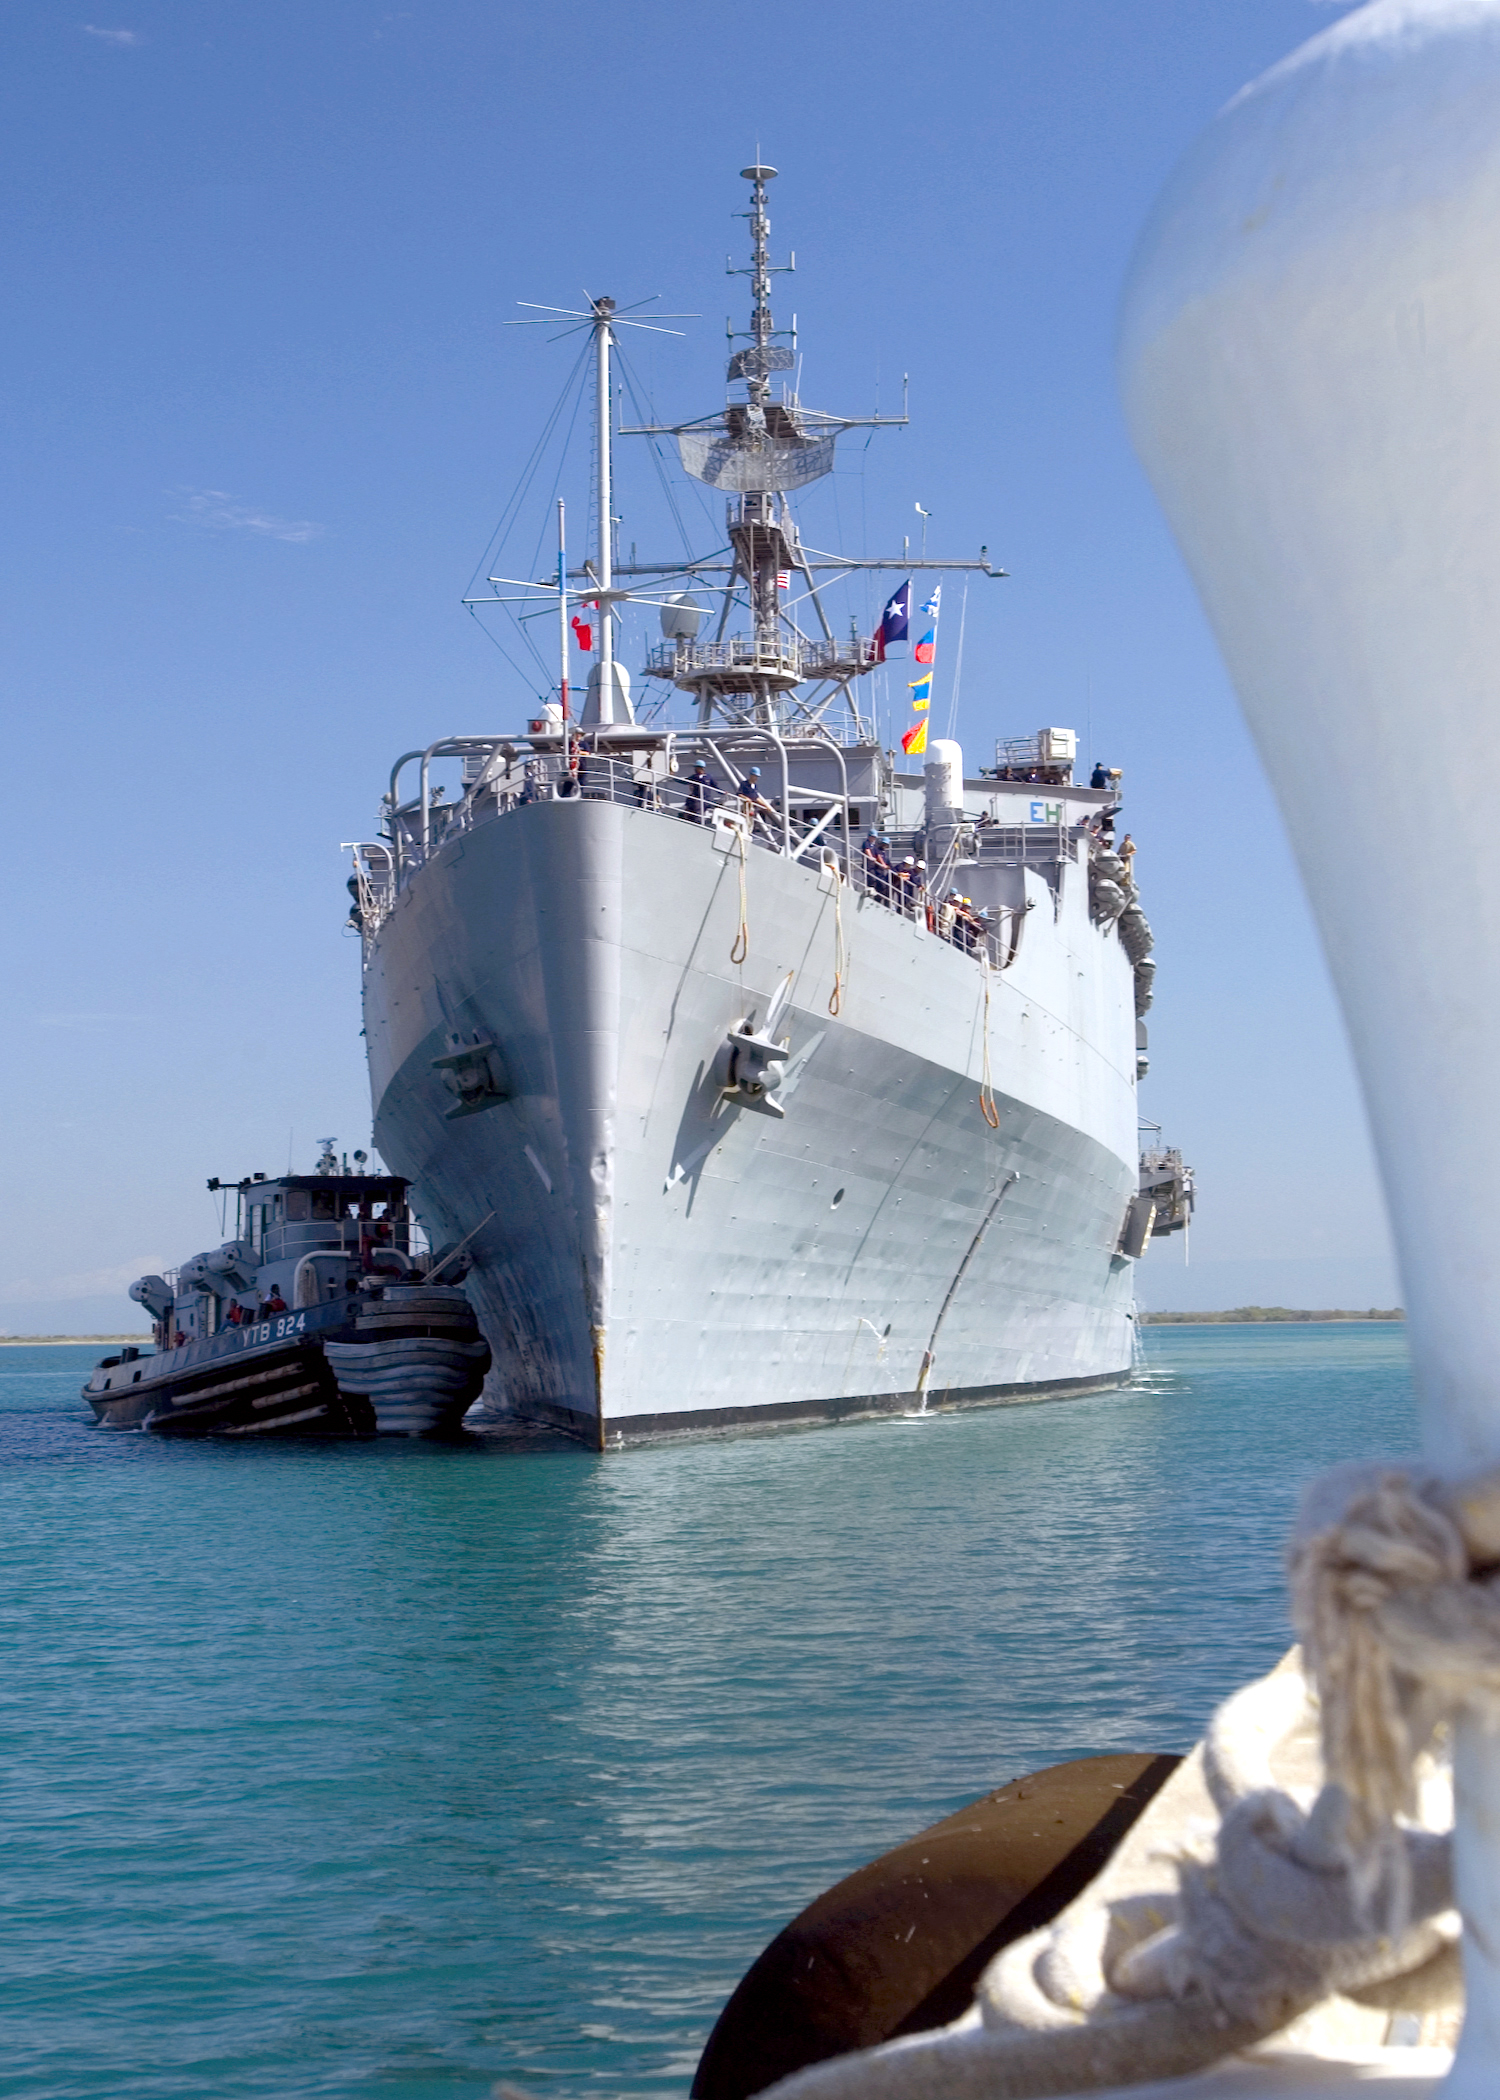 US_Navy_050510-N-2903M-001_The_amphibious_transport_dock_ship_USS_Austin_%28LPD_4%29%2C_is_gently_maneuvered_into_a_pier_at_Naval_Station_Guantanamo_Bay%2C_Cuba.jpg